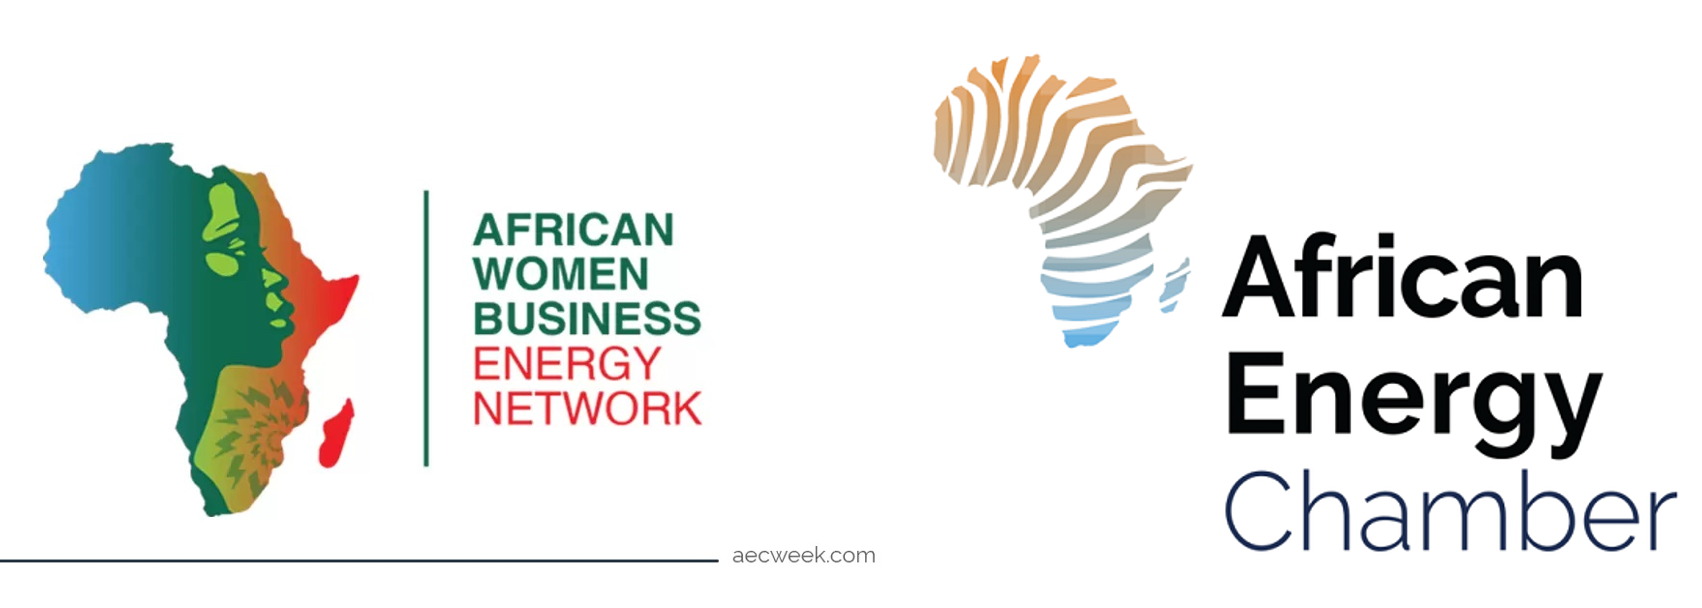 African Energy Chamber Launches a New Women Initiative – the African Women Business Energy Network (AWBEN)